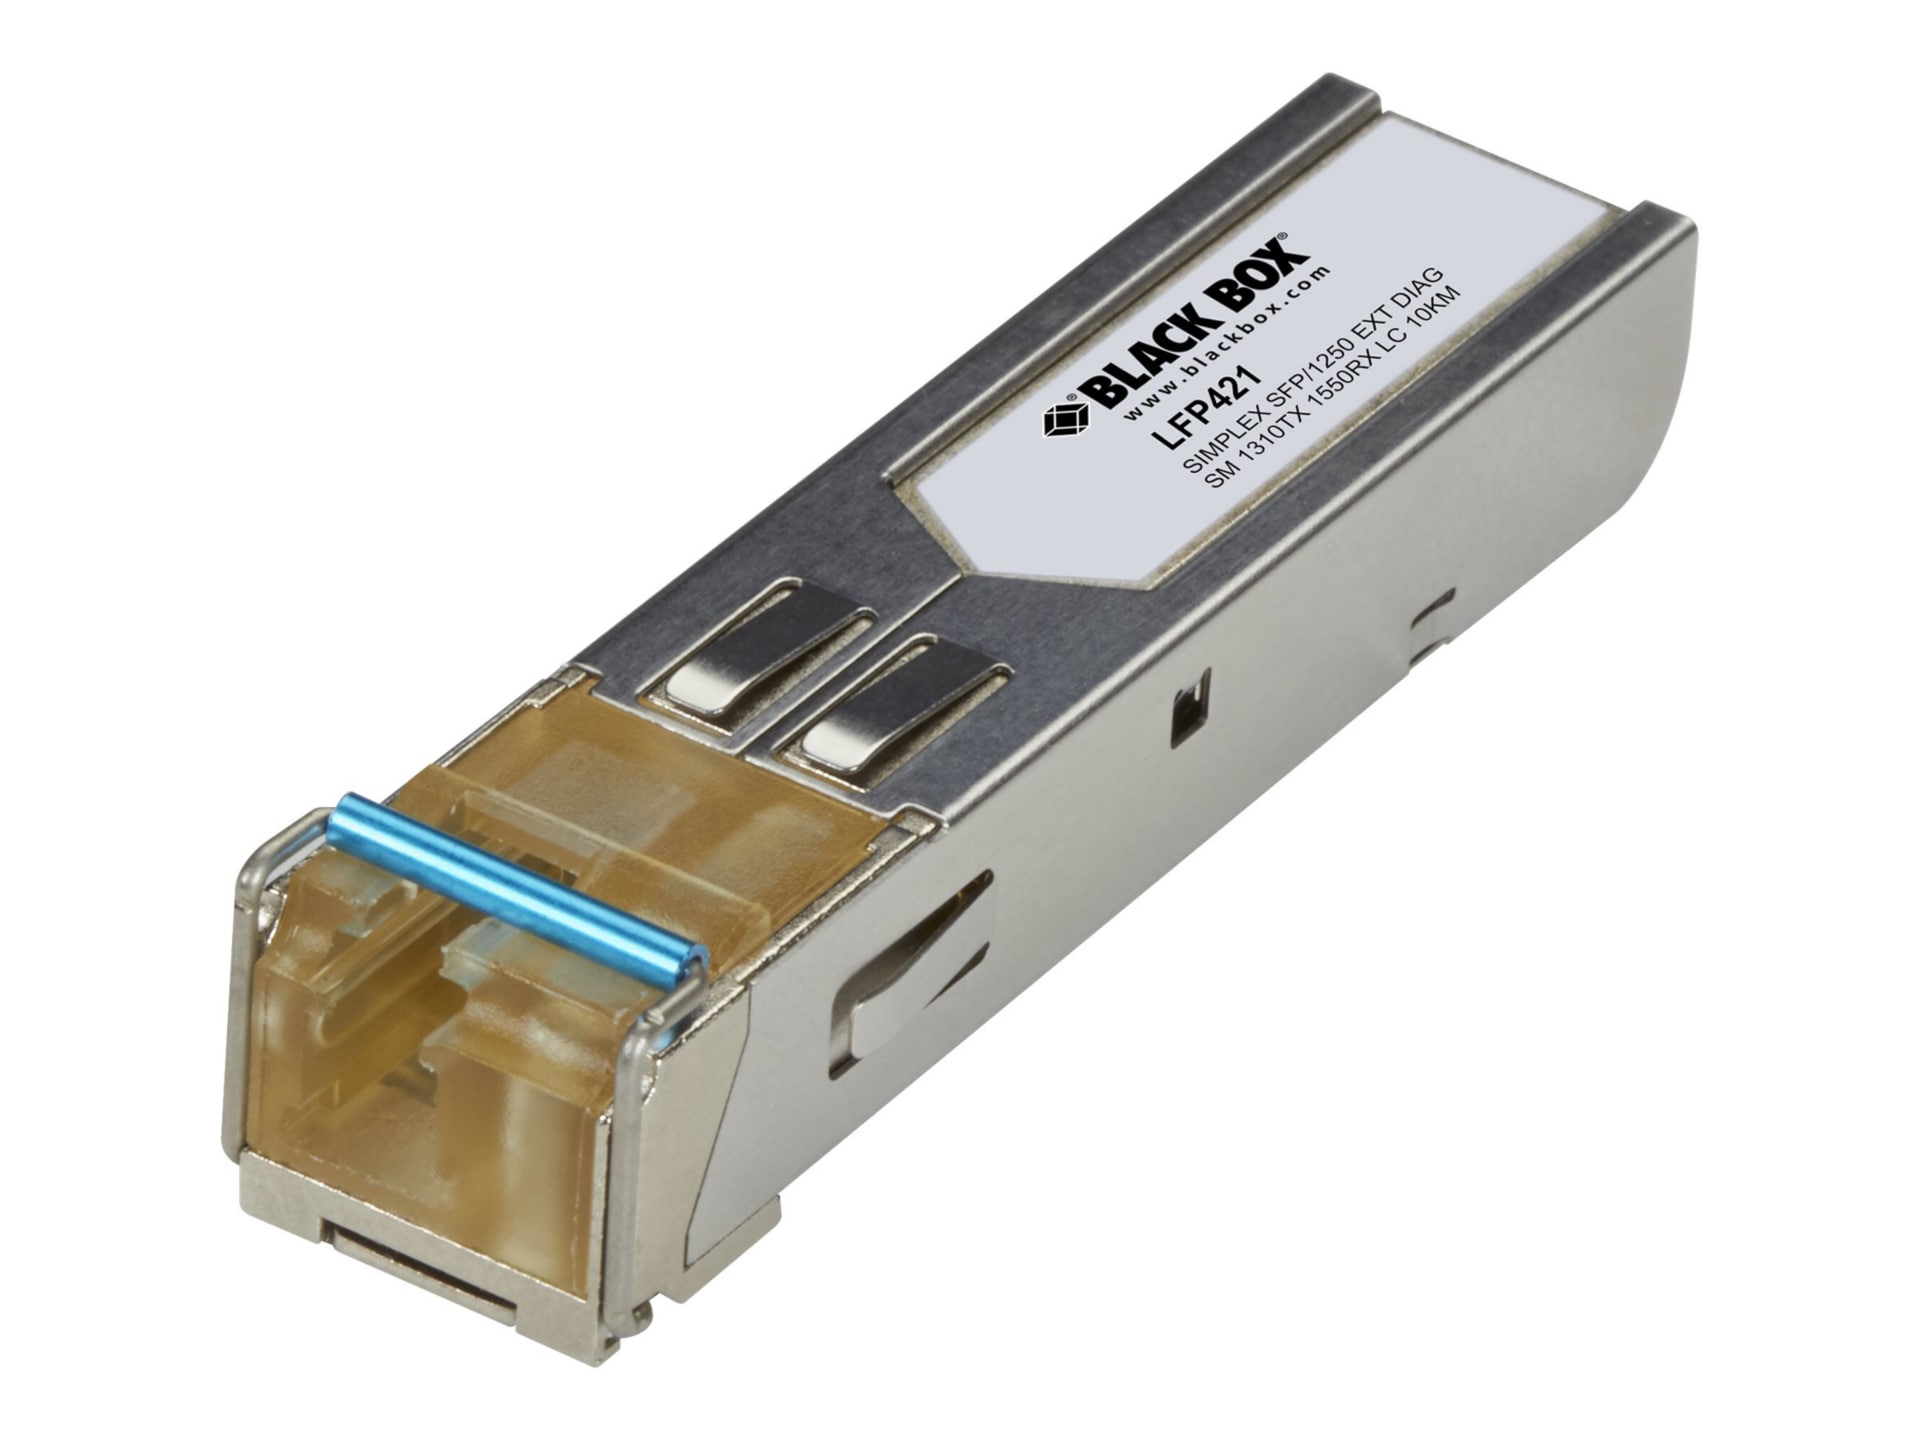 Black Box with Extended Diagnostics - SFP (mini-GBIC) transceiver module - TAA Compliant